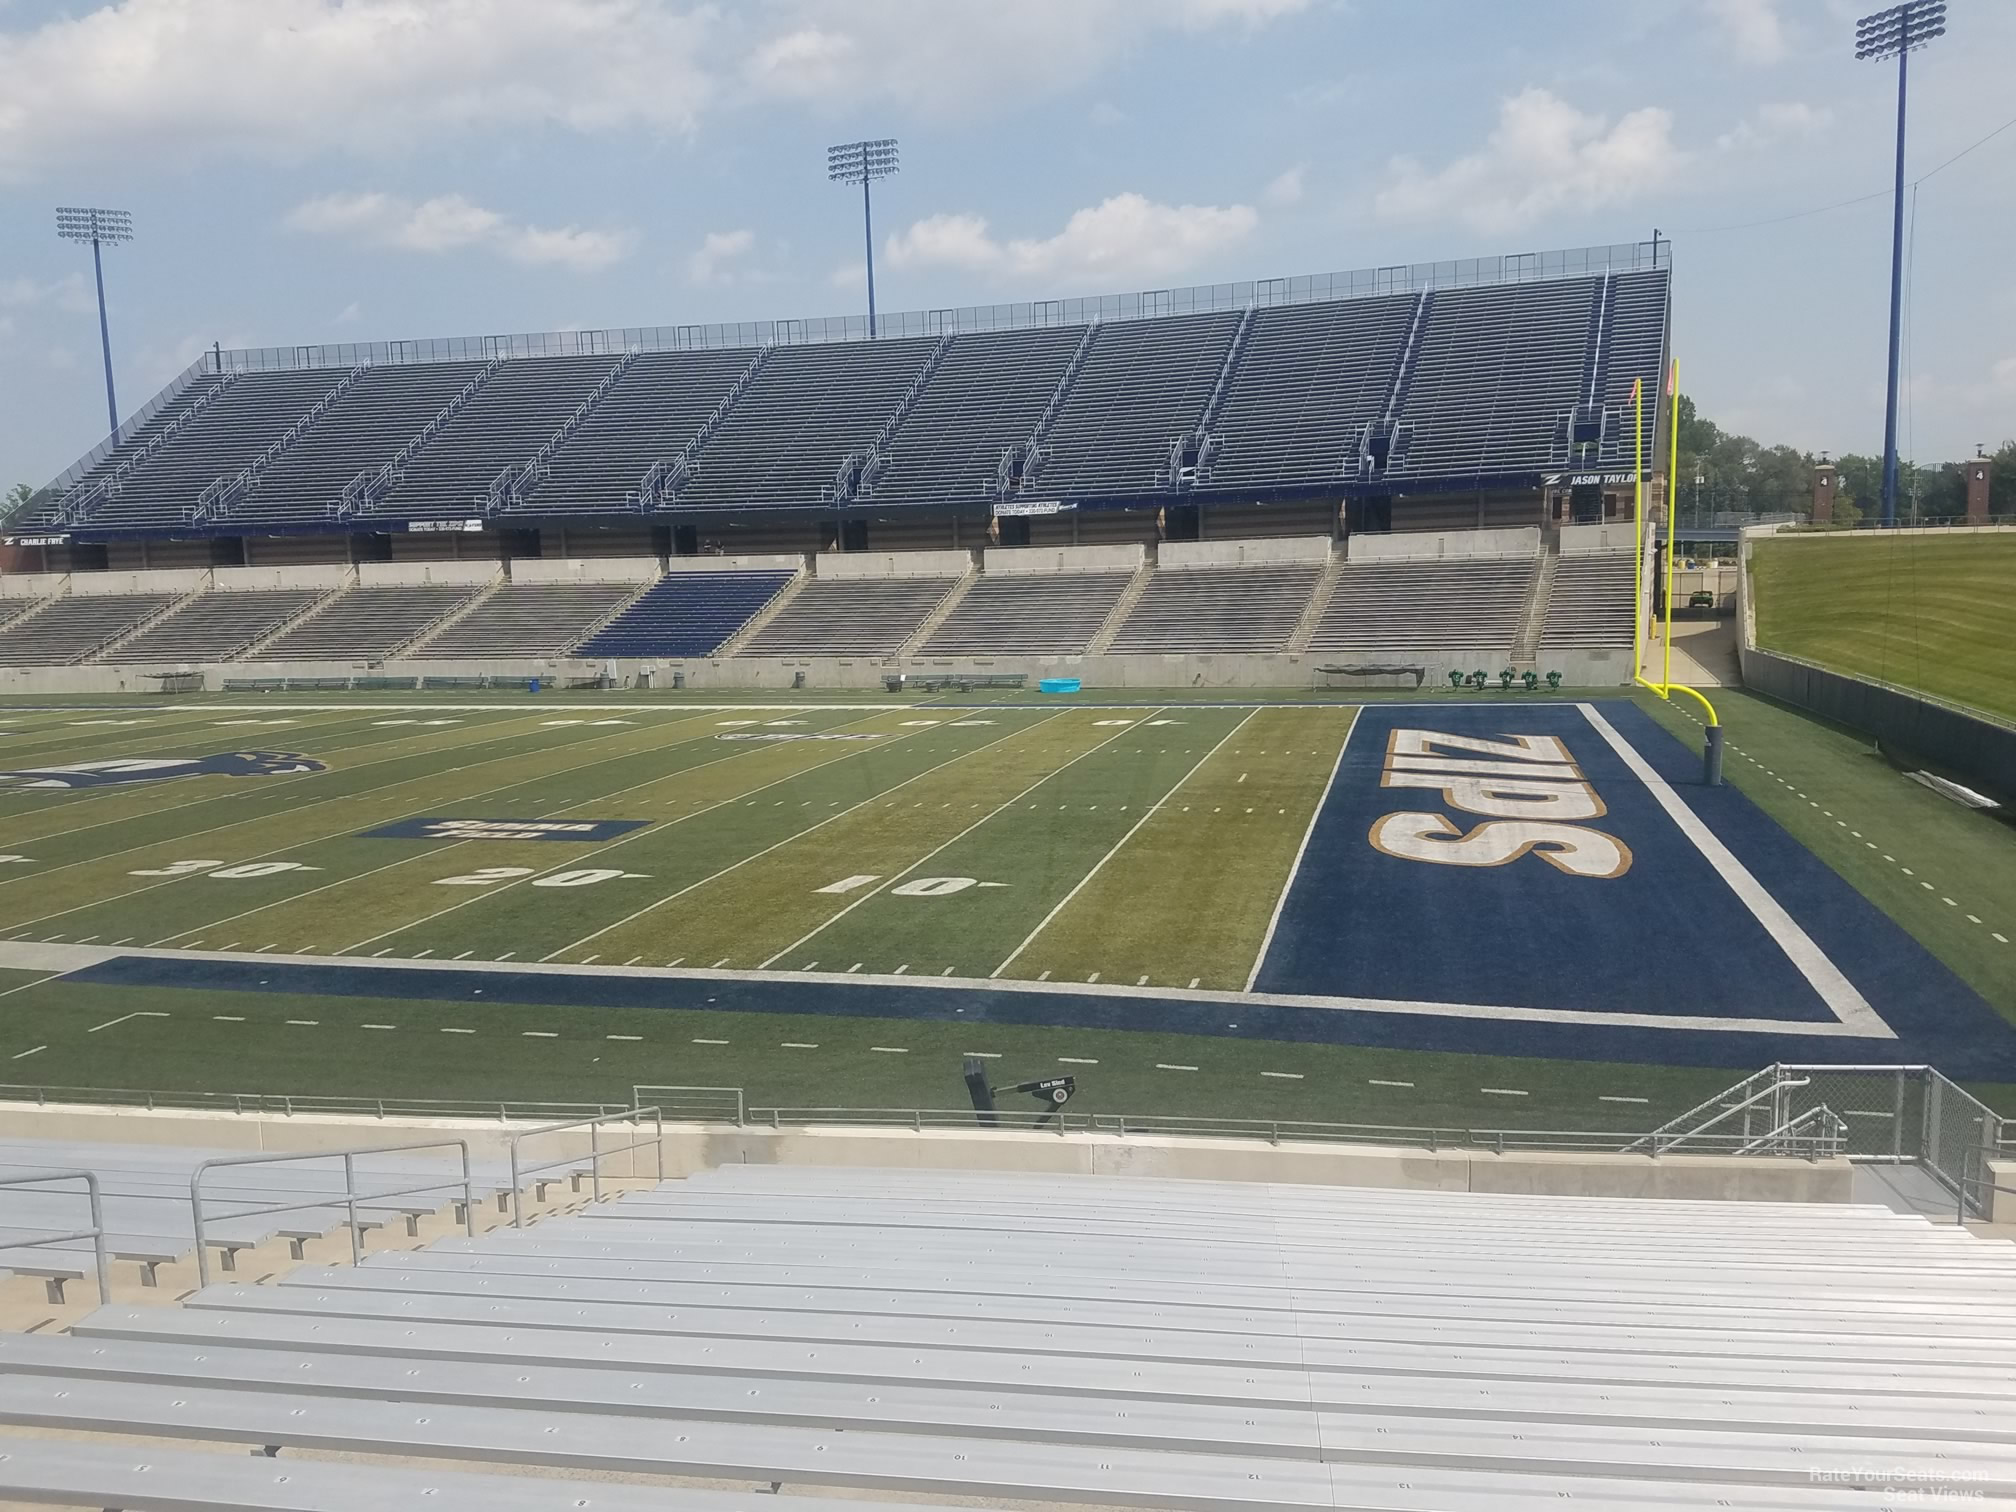 section 118, row 21 seat view  - infocision stadium